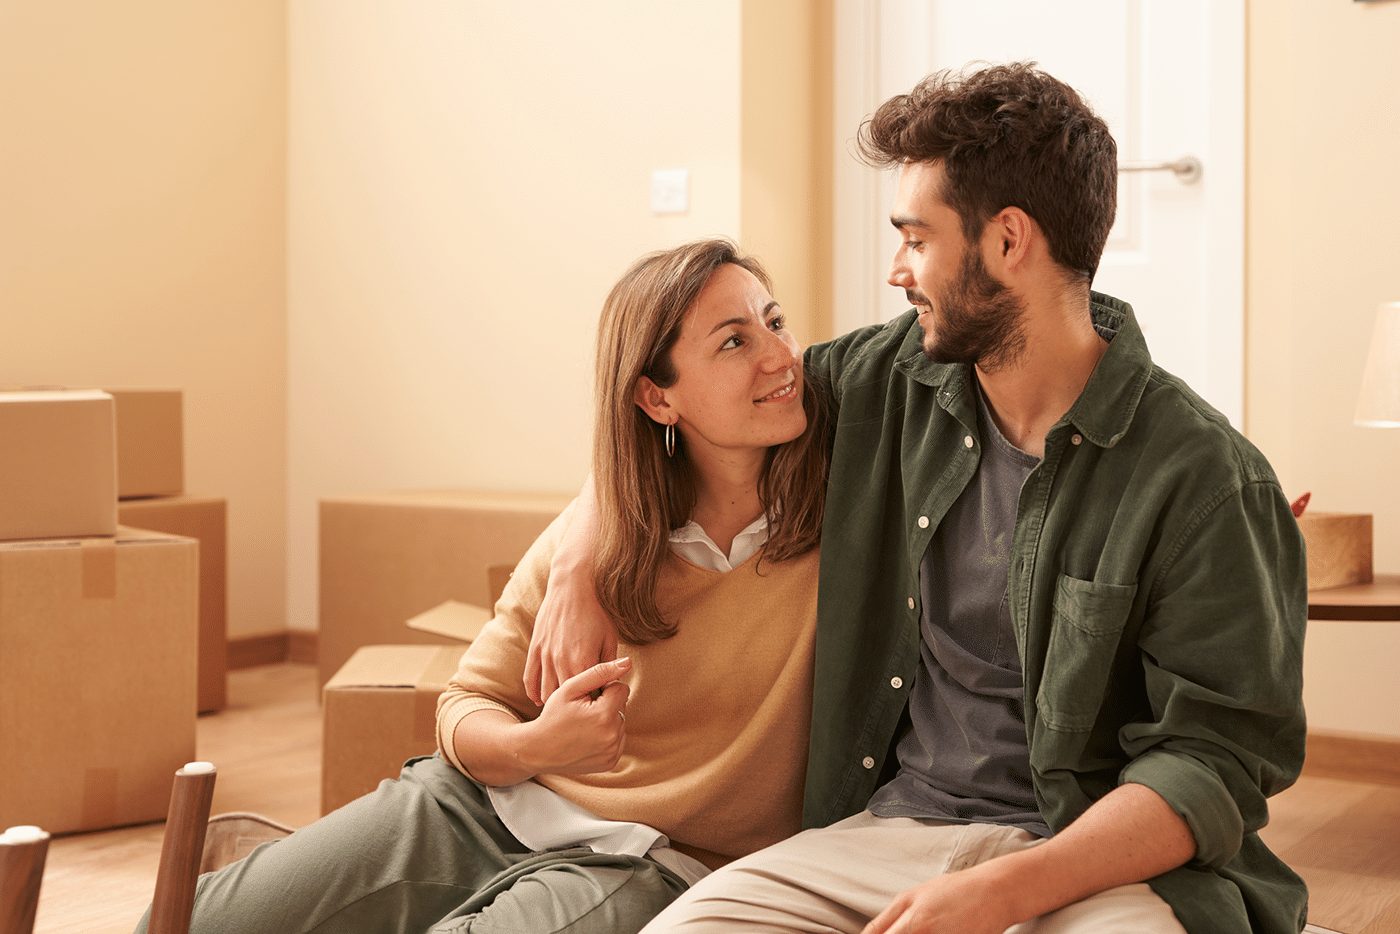 Young man hugging and looking at girlfriend while sitting on floor near carton boxes in new flat